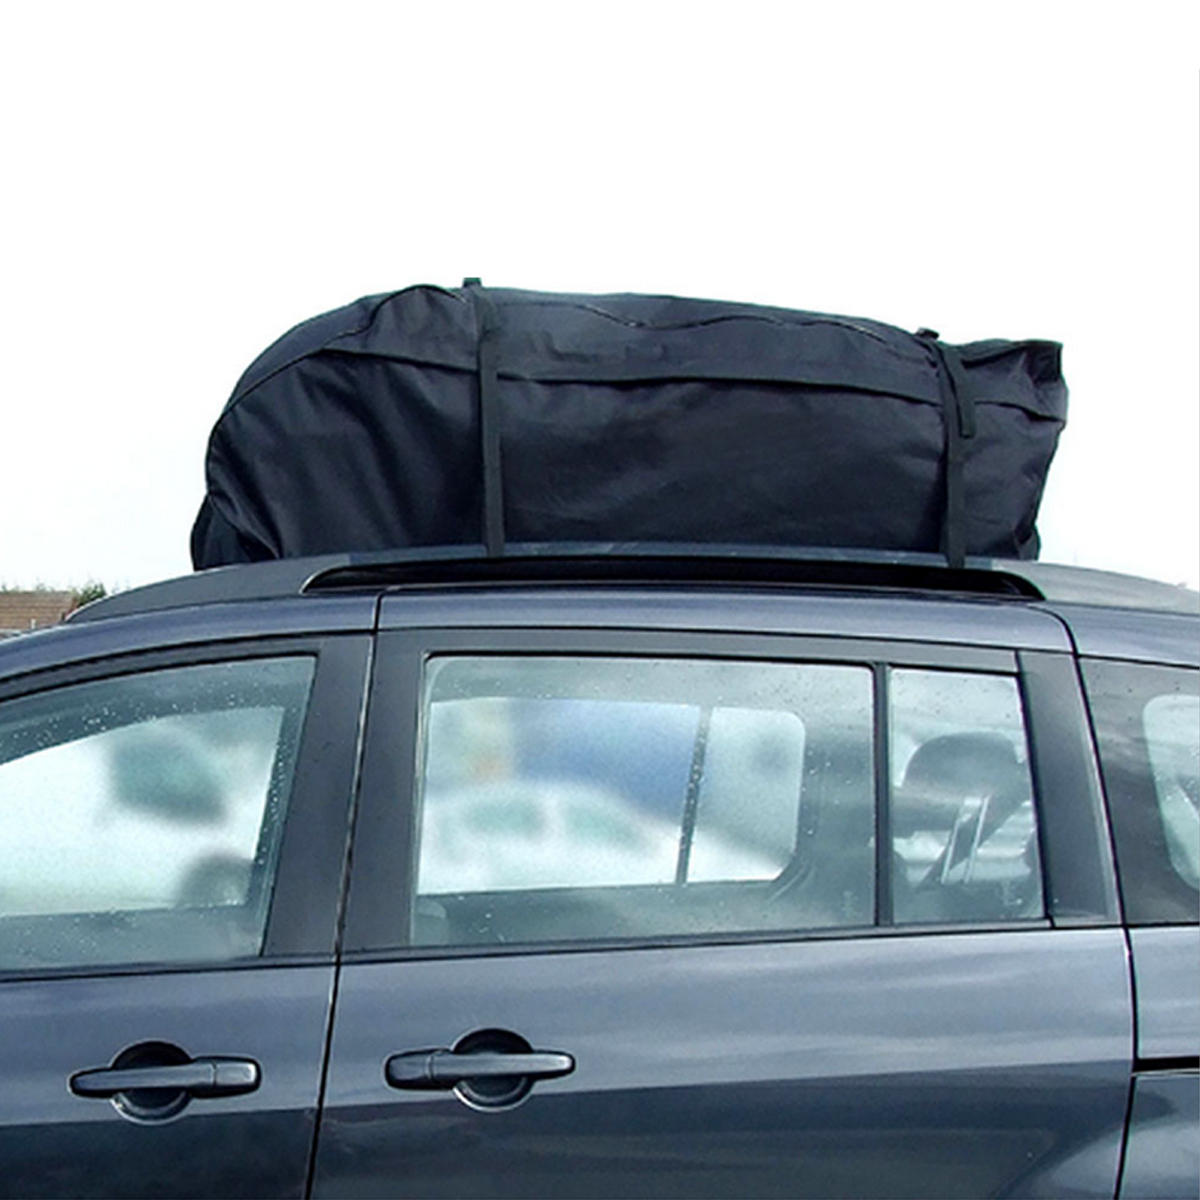 

580L 130x100x45cm Universal Waterproof Car Roof Cover Top Rack Bag Carrier Cargo 4WD Luggage Travel AU